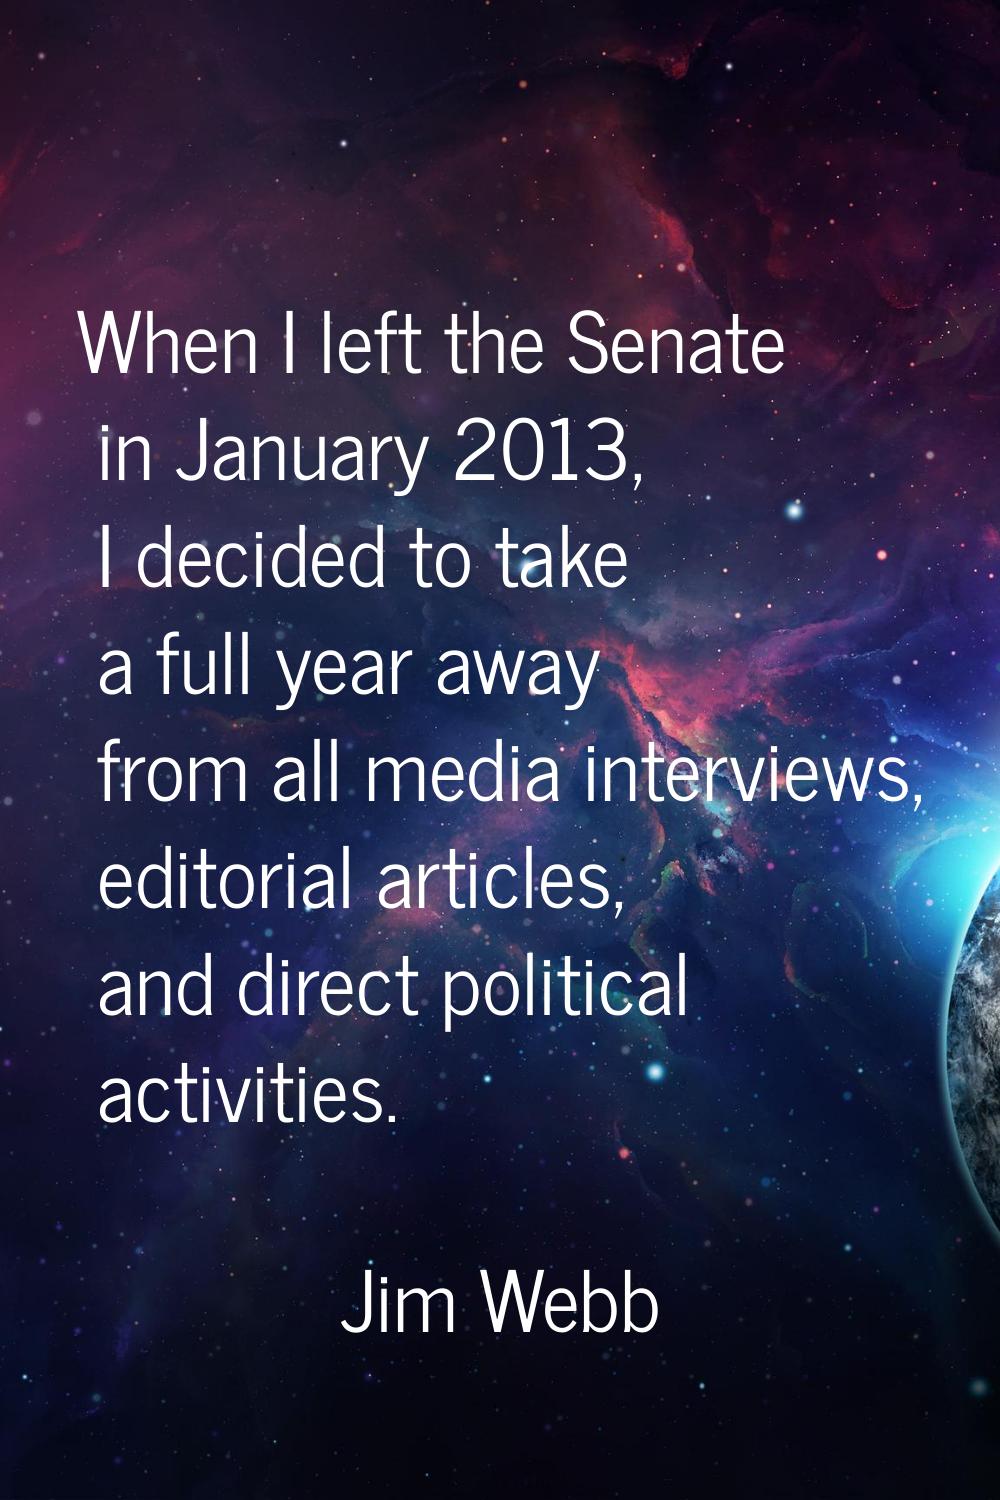 When I left the Senate in January 2013, I decided to take a full year away from all media interview